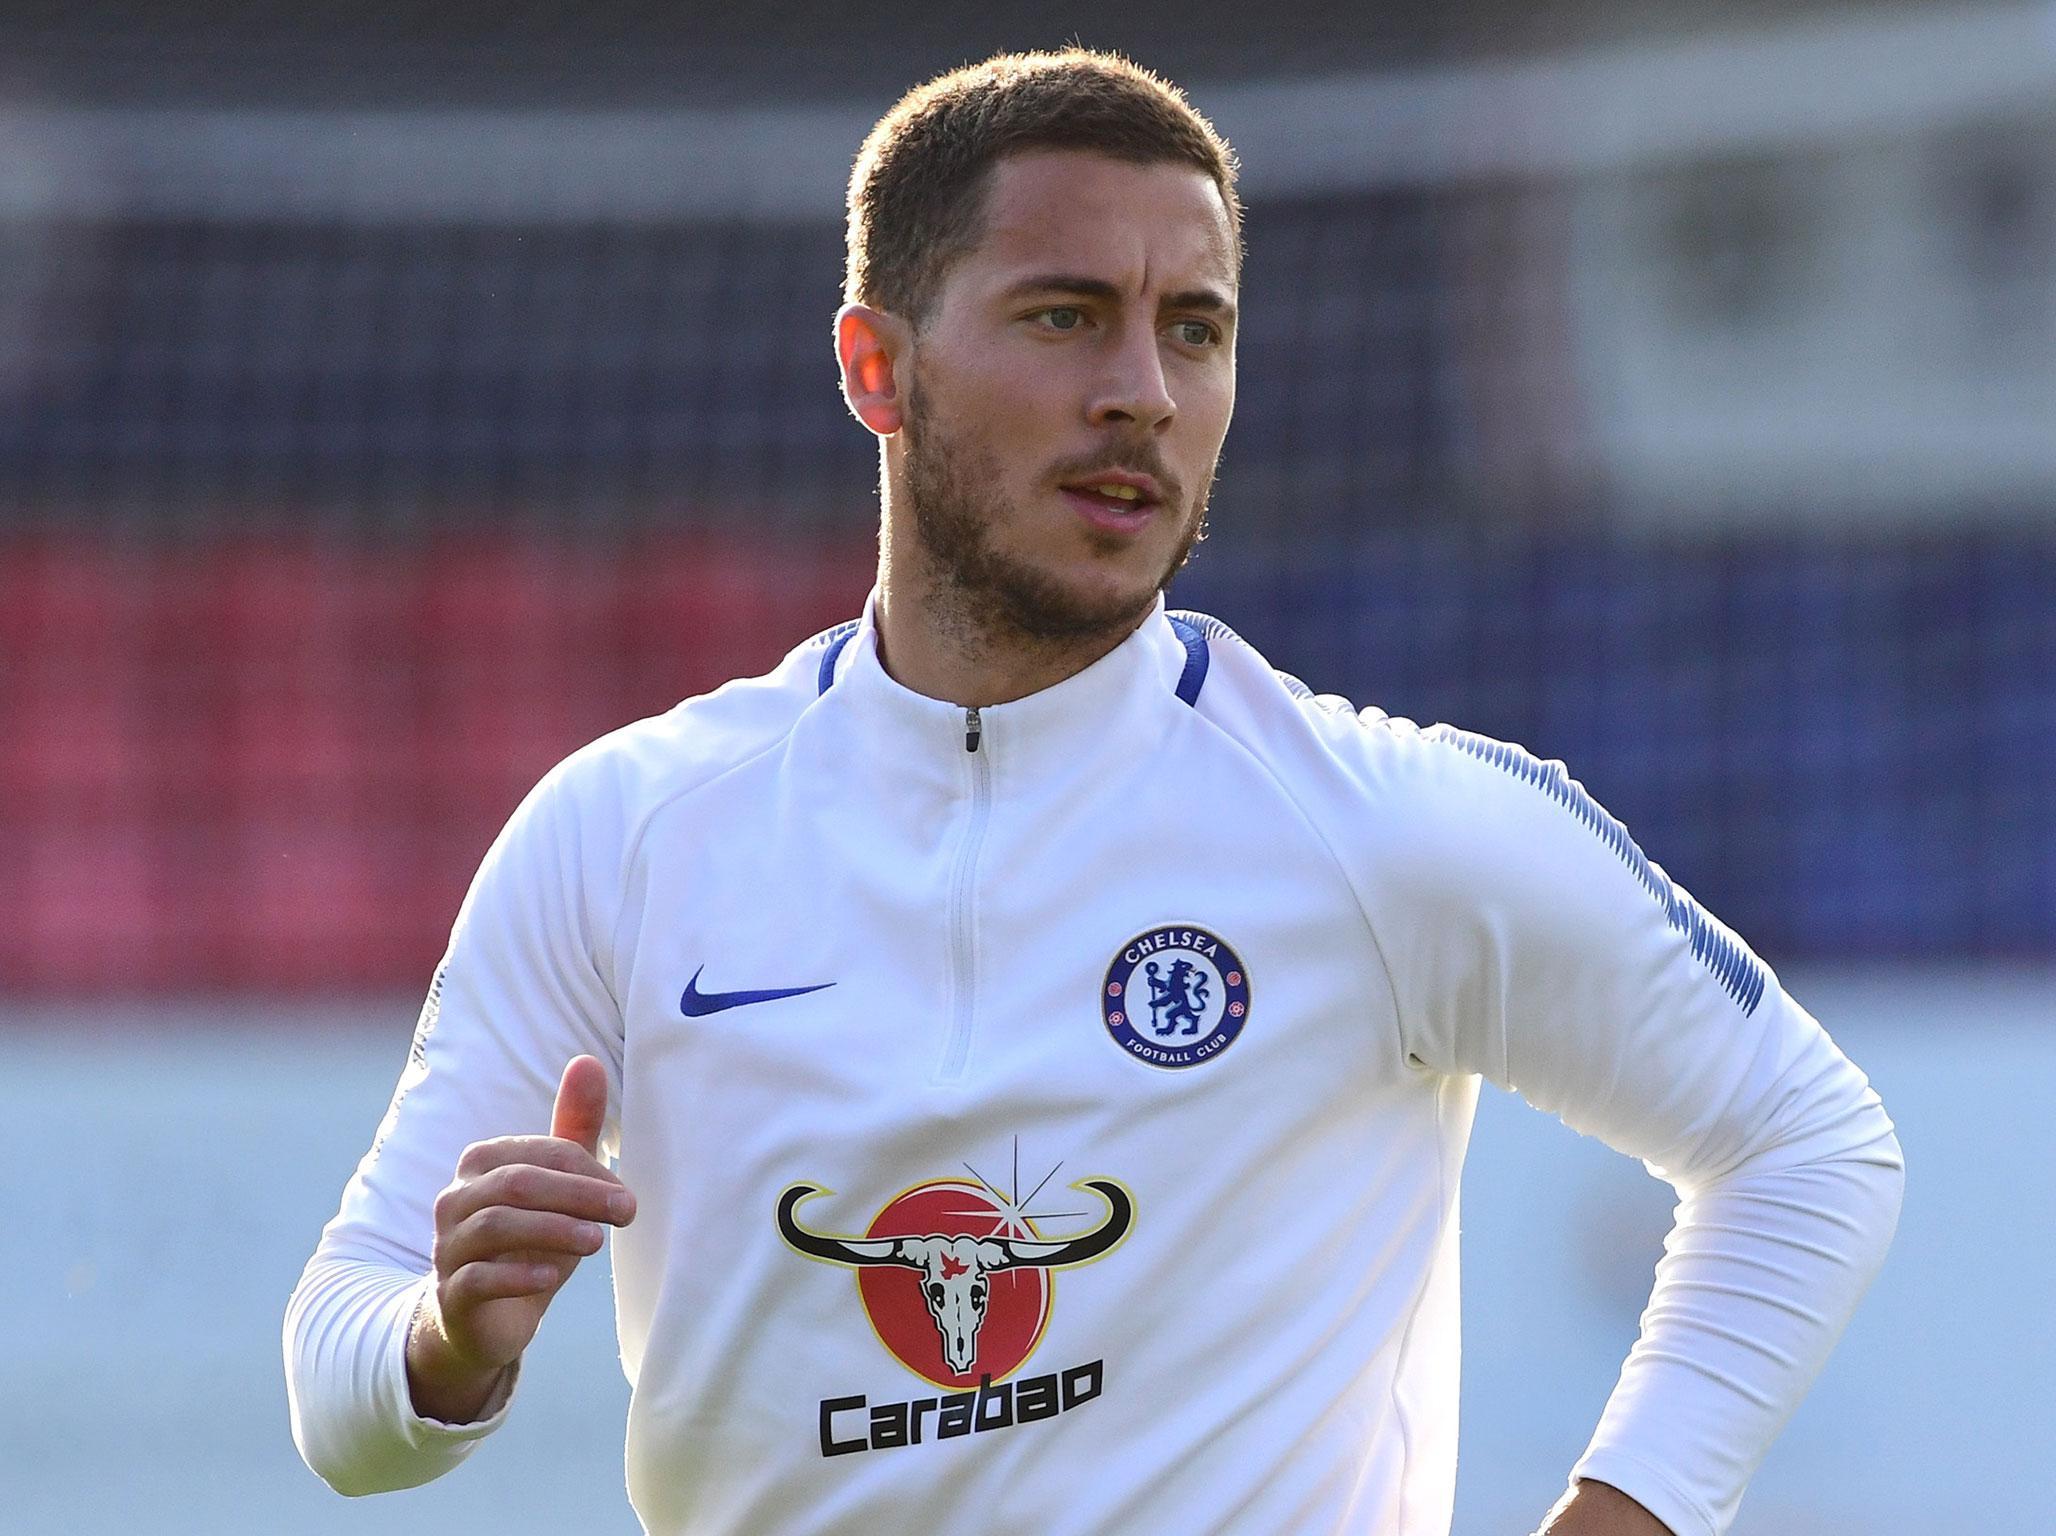 Eden Hazard is confident the champions have what it takes to challenge on all fronts this season